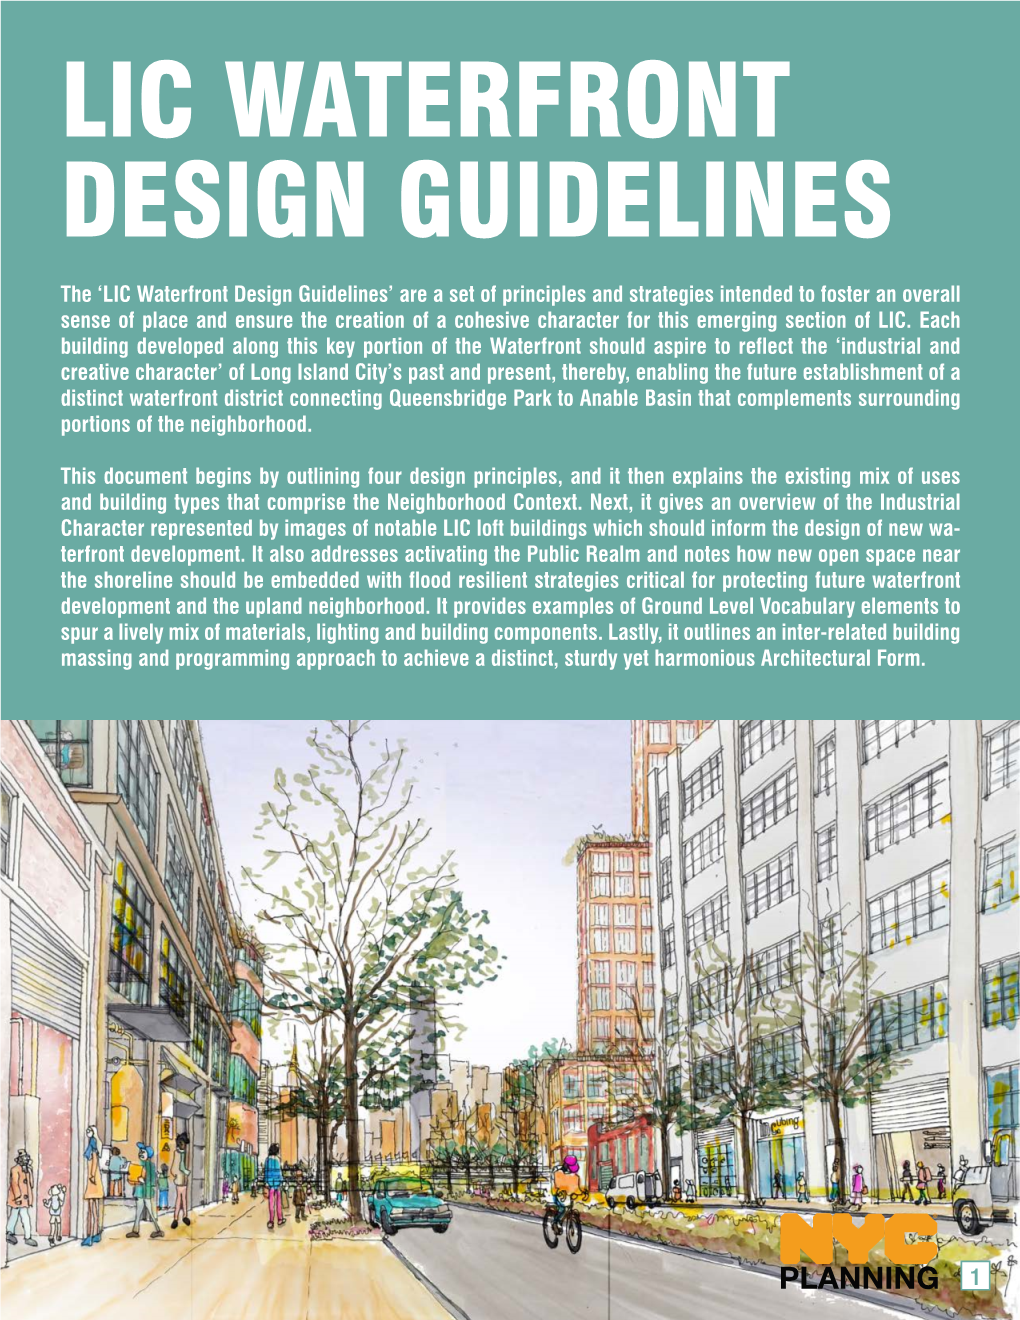 Lic Waterfront Design Guidelines